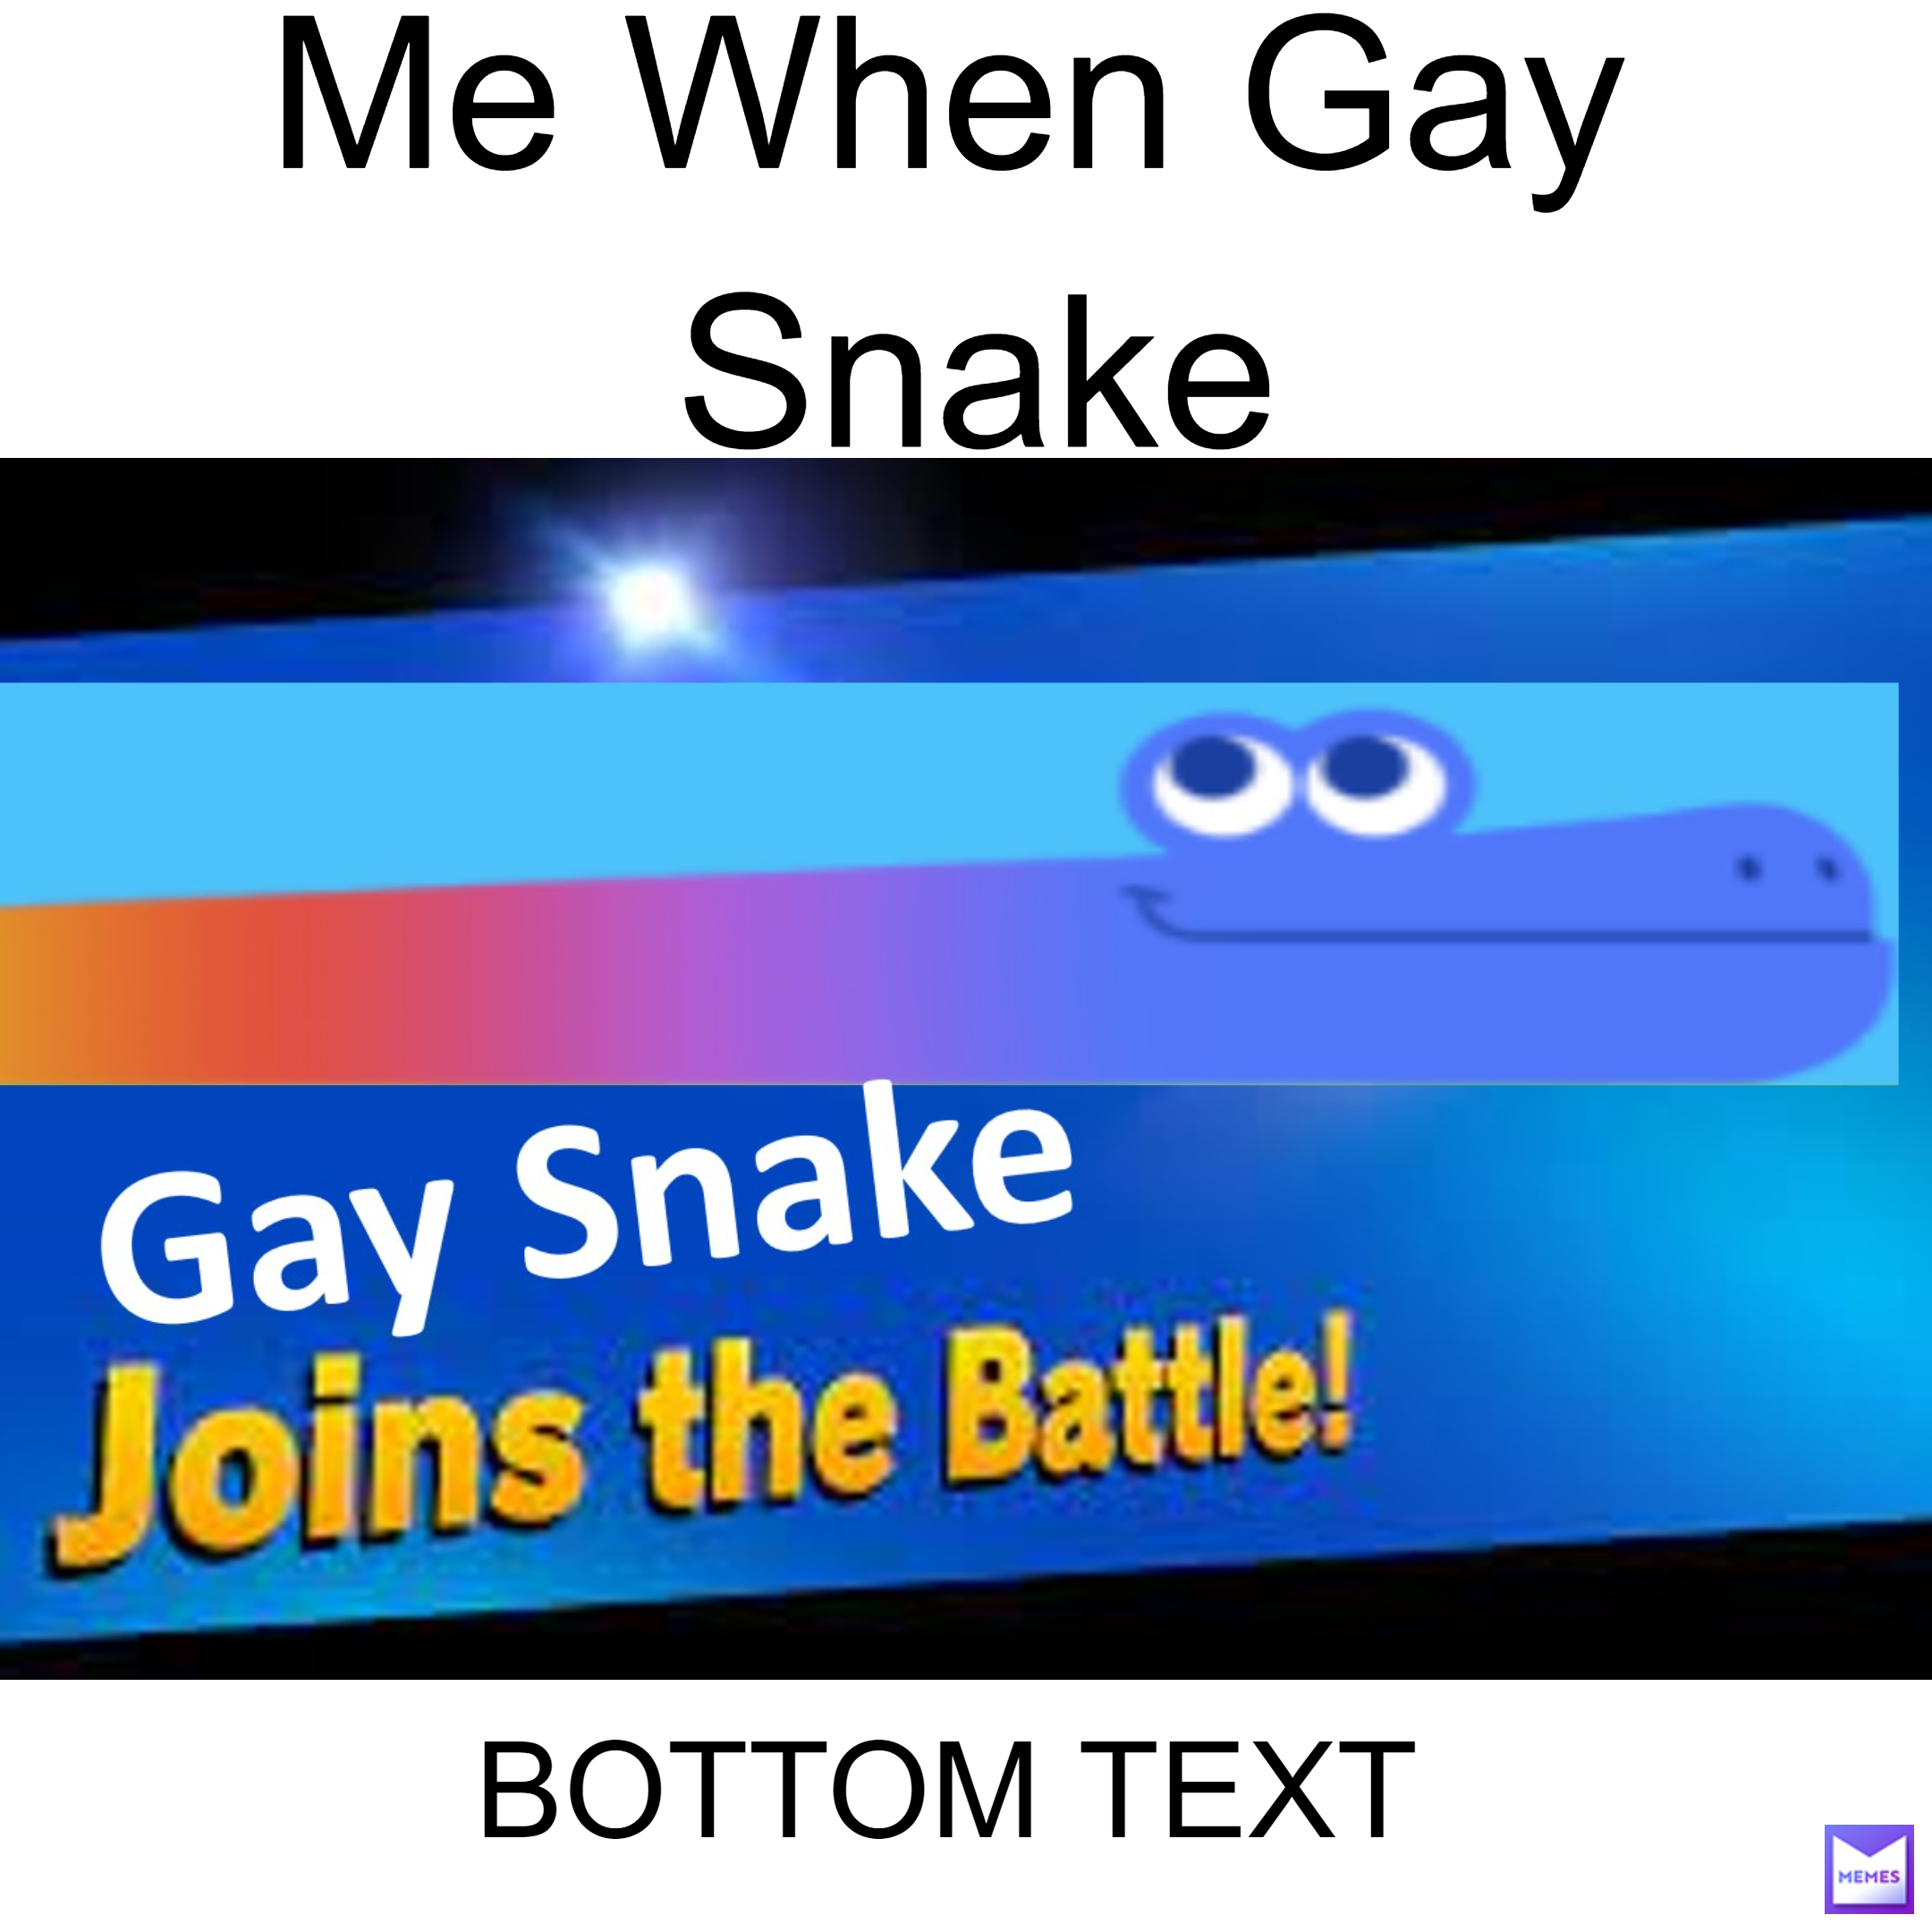 did it hurt when your gay meme